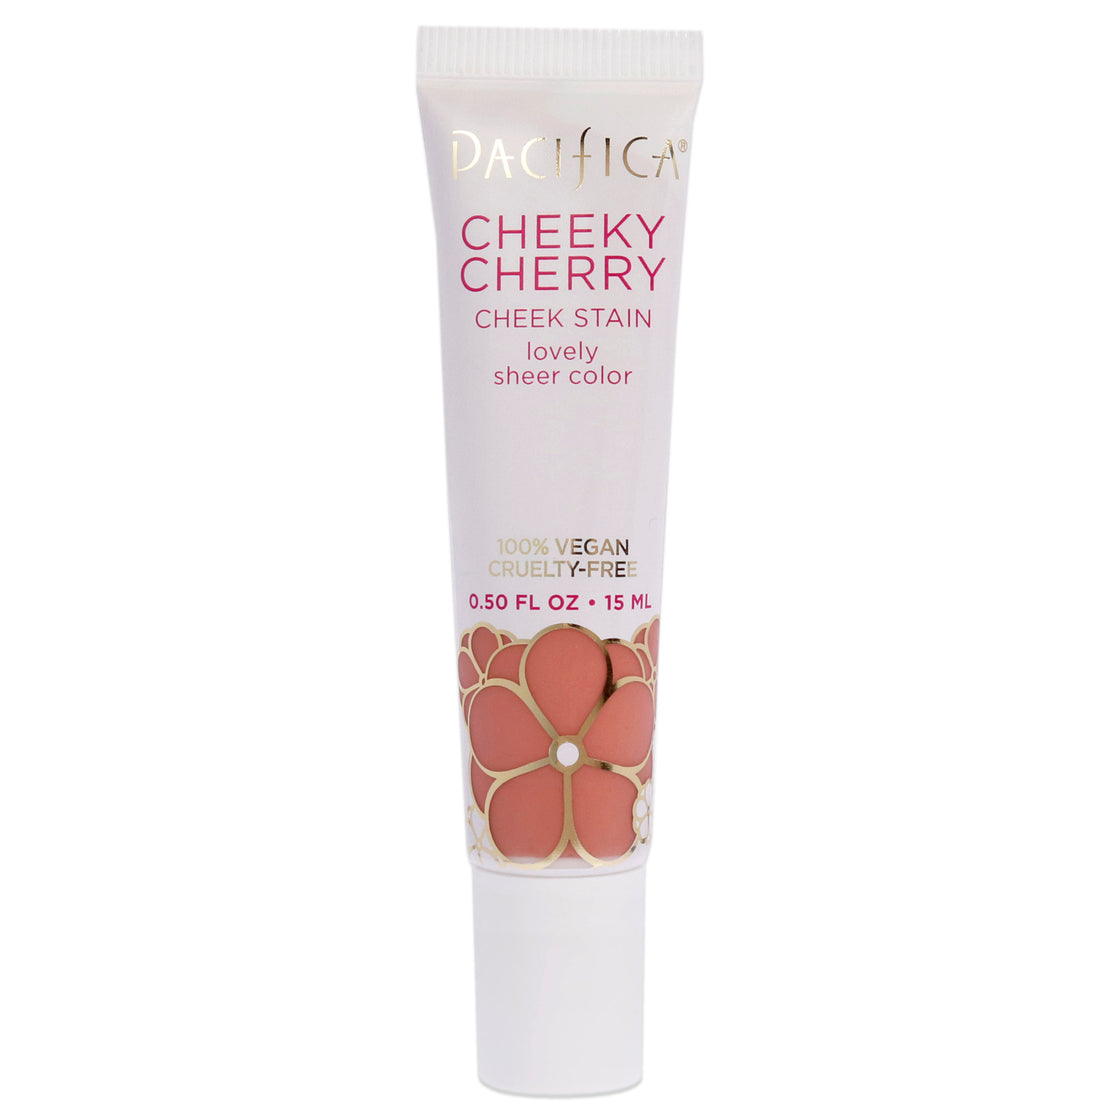 Cheeky Cherry Cheek Stain - Cherry Baby by Pacifica for Women - 0.50 oz Blush